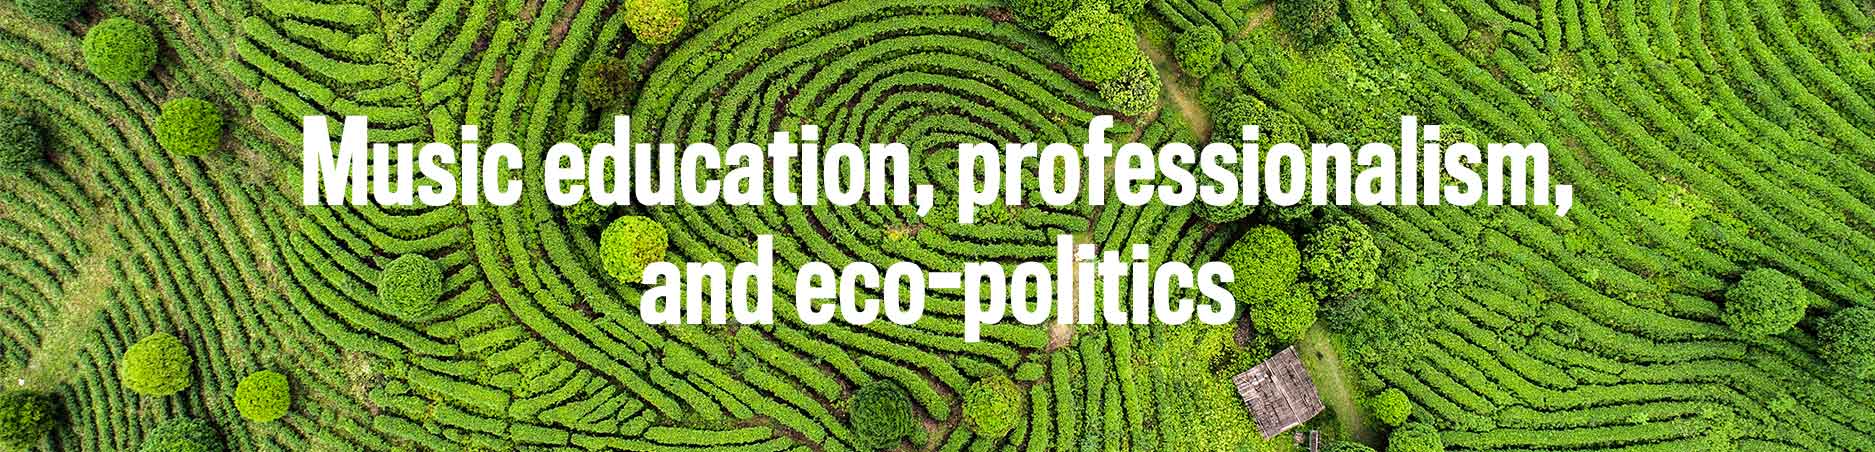 The name of the research project is Music education, professionalism, and ecopolitics.